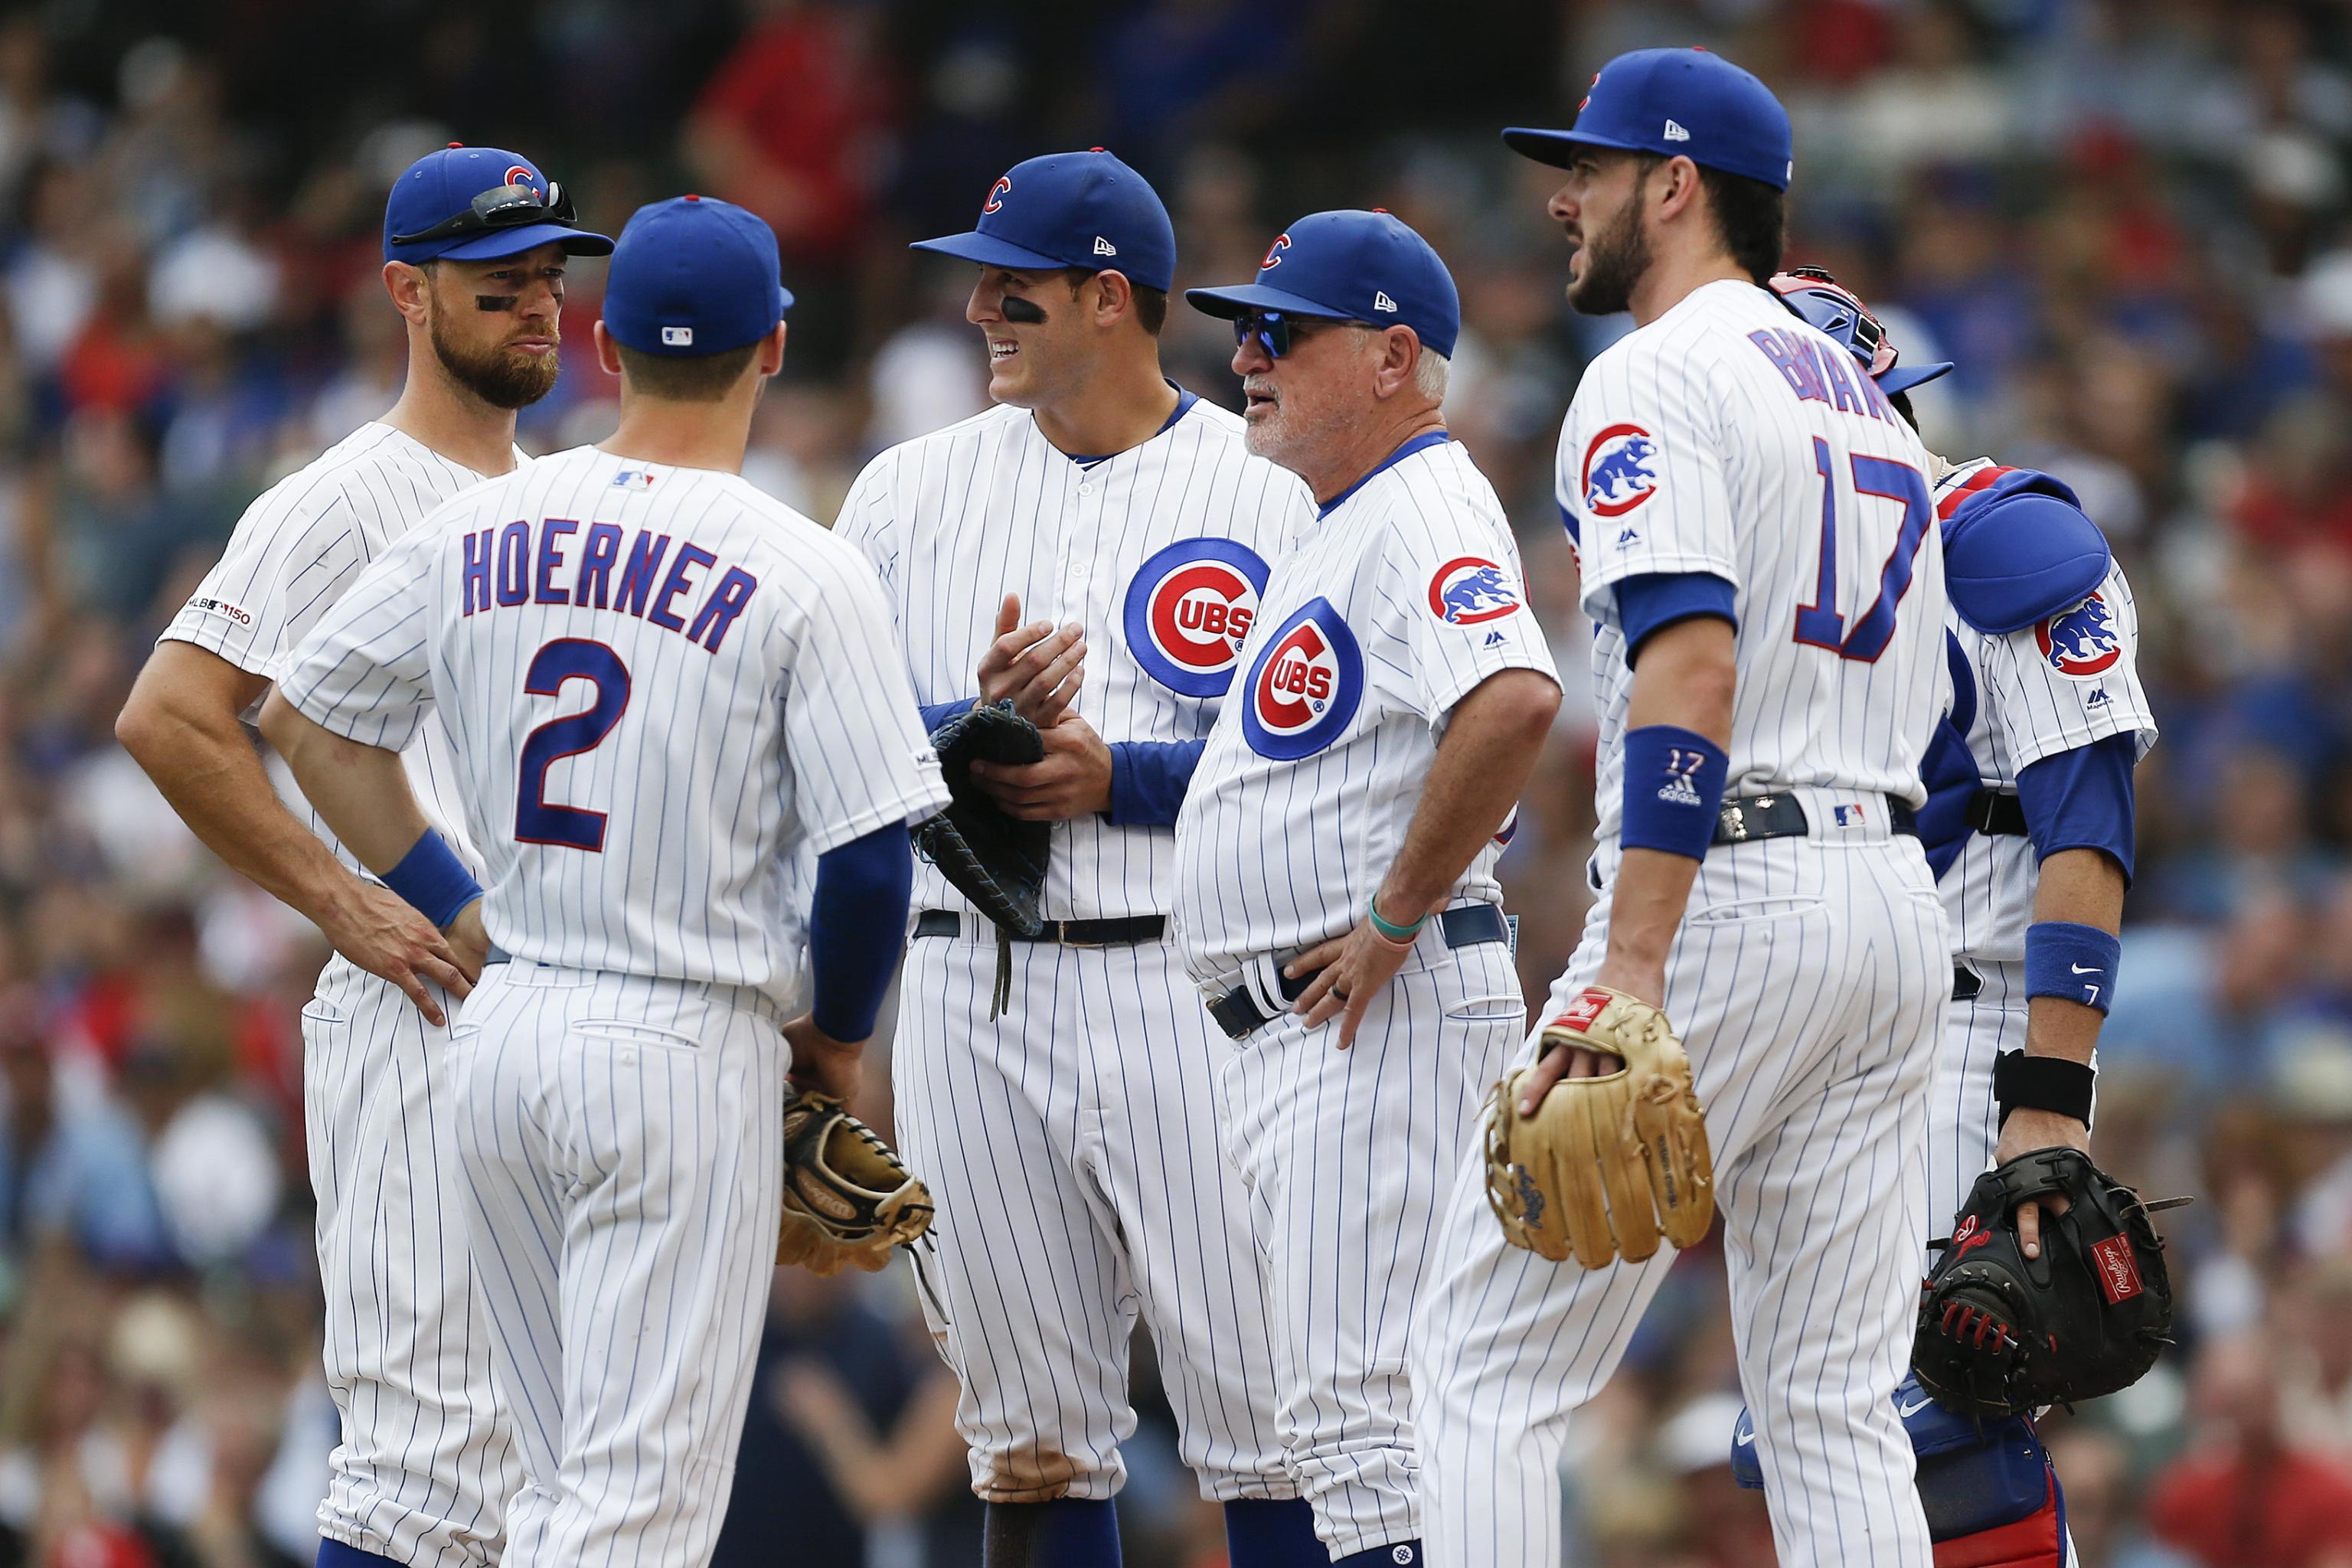 Why we picked the Cubs to win the 2015 World Series